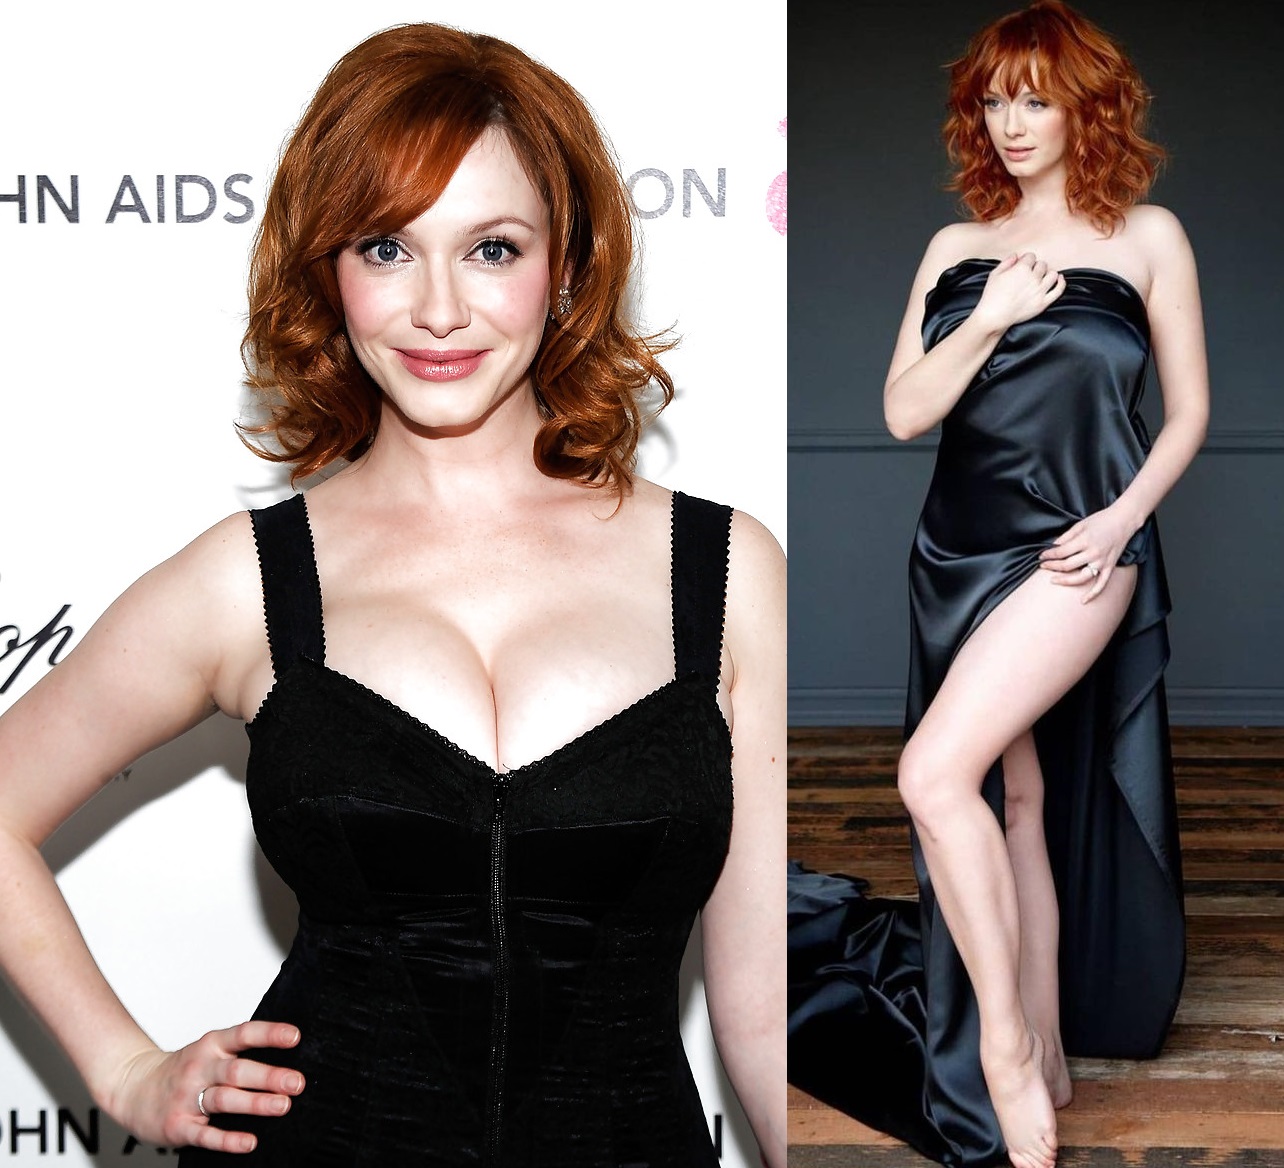 Born in May 1975, Christina Hendricks is one of the sexiest women in Hollyw...